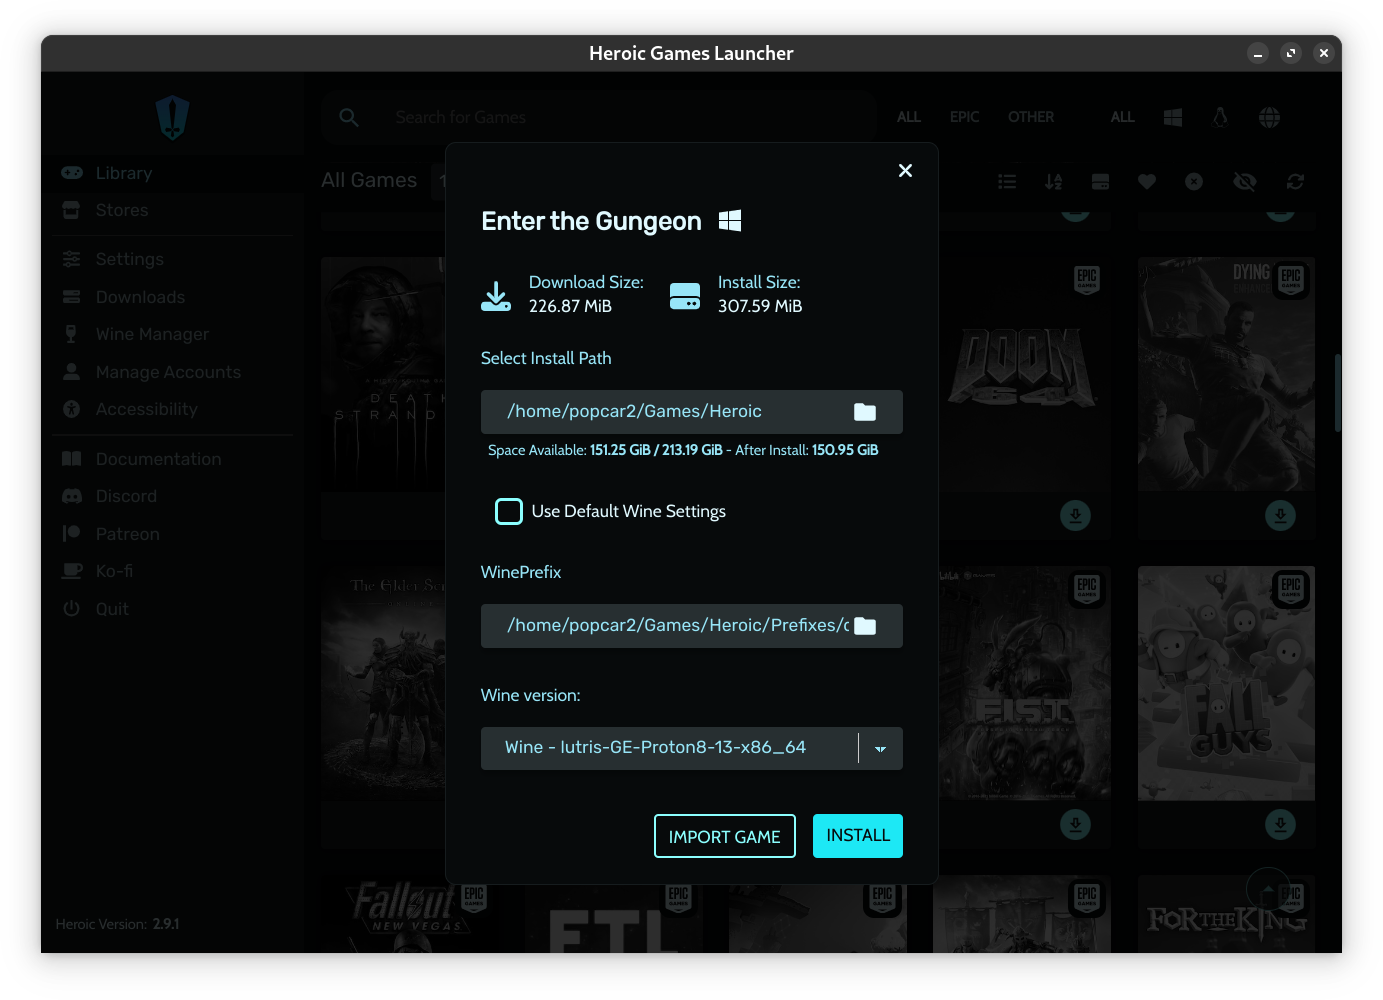 A screenshot showing the Heroic Launcher installation prompt